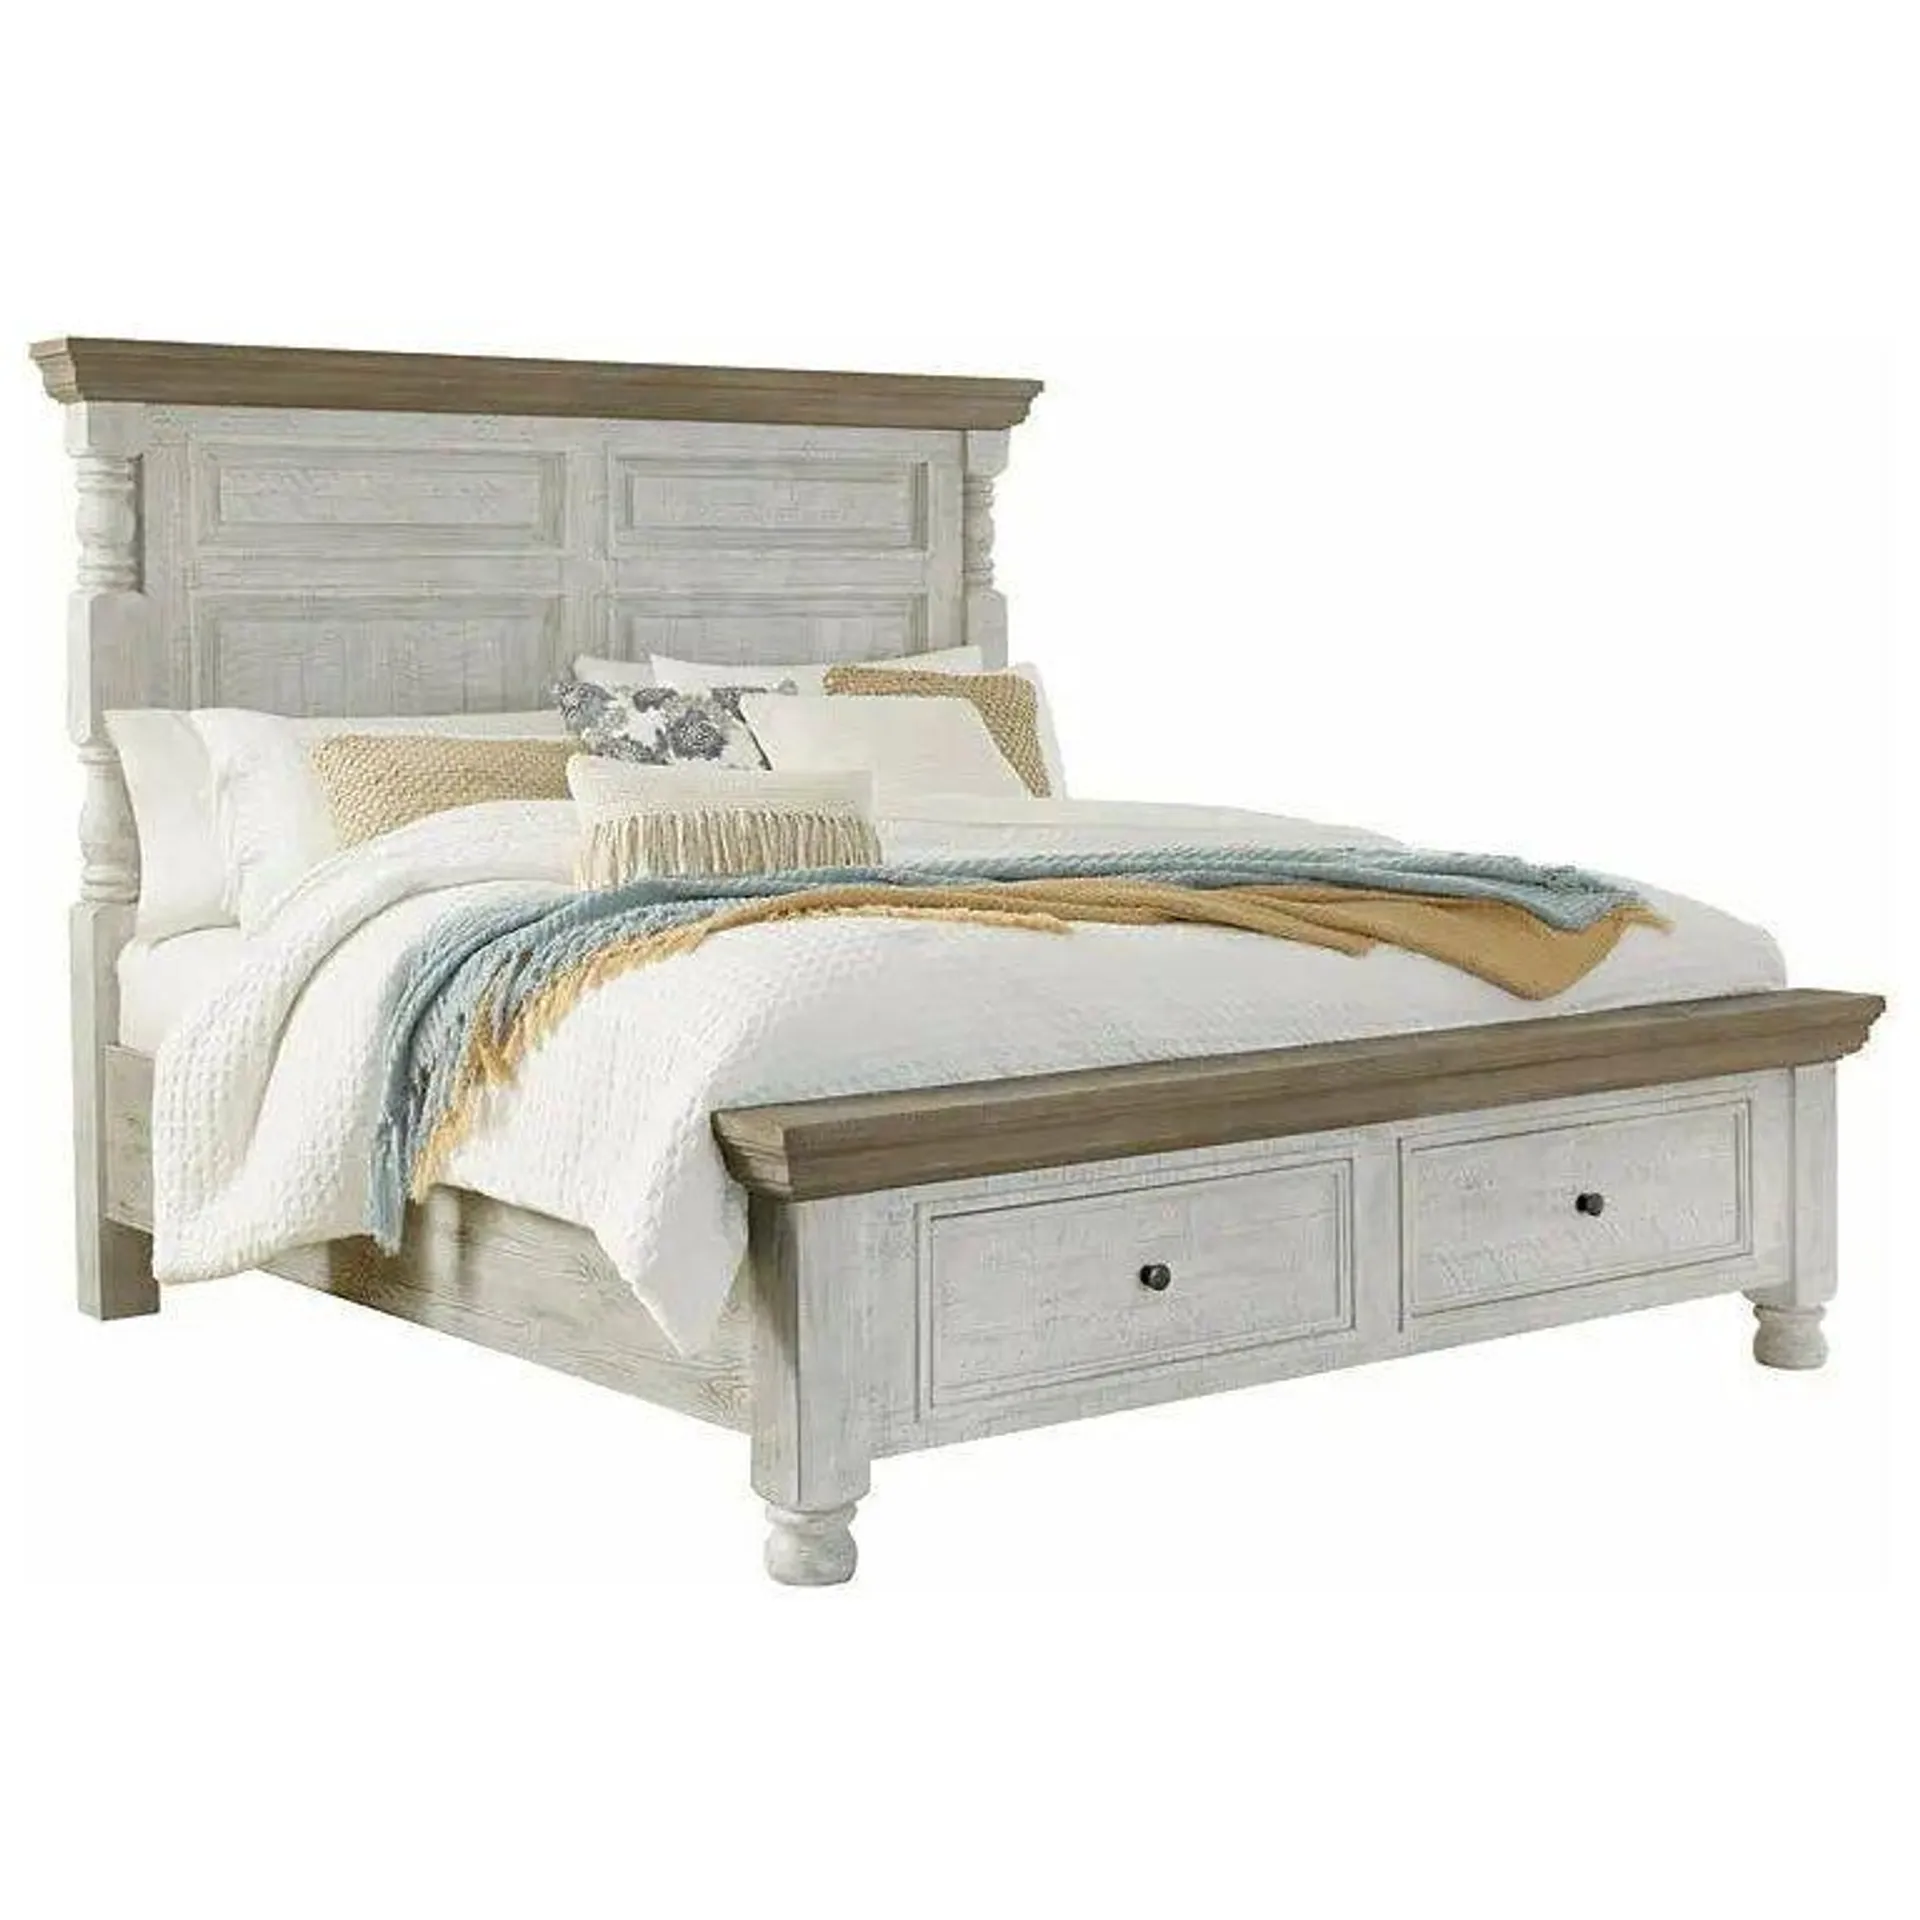 Havalance Package - King Bed